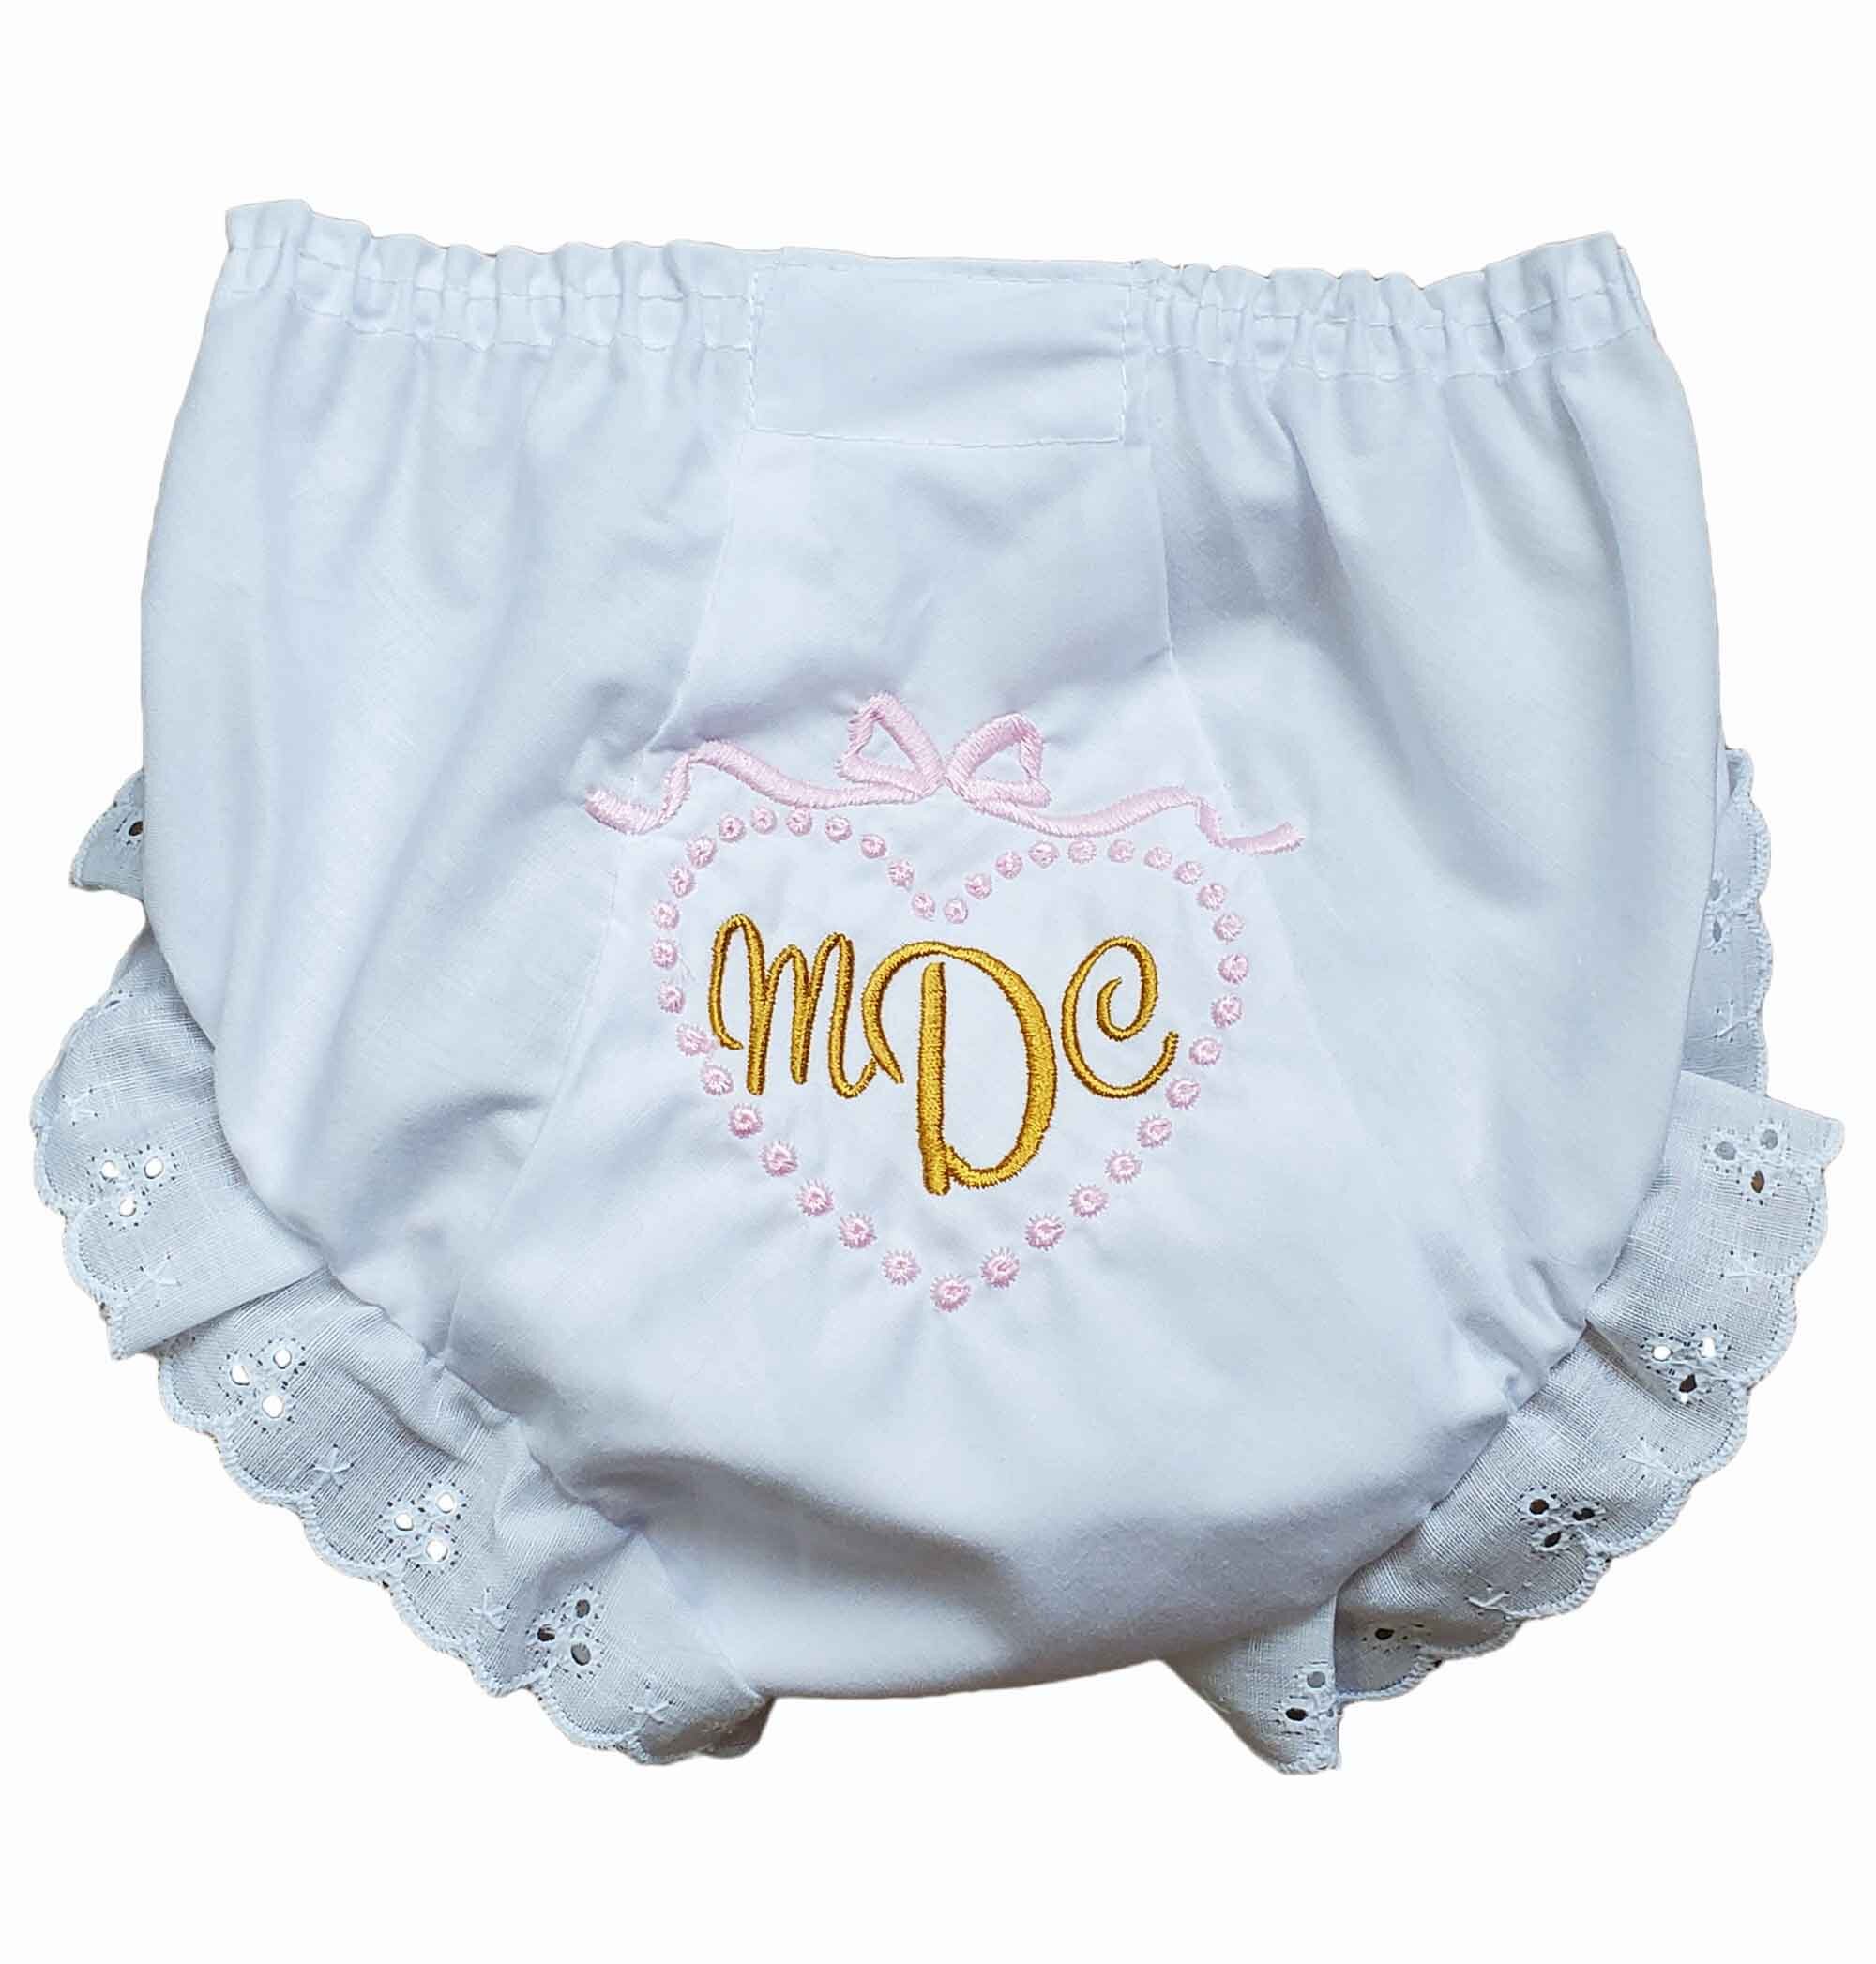 Personalized Baby Bloomers Quick Ship Monogramed Diaper Cover Circle Script Font Bloomers 